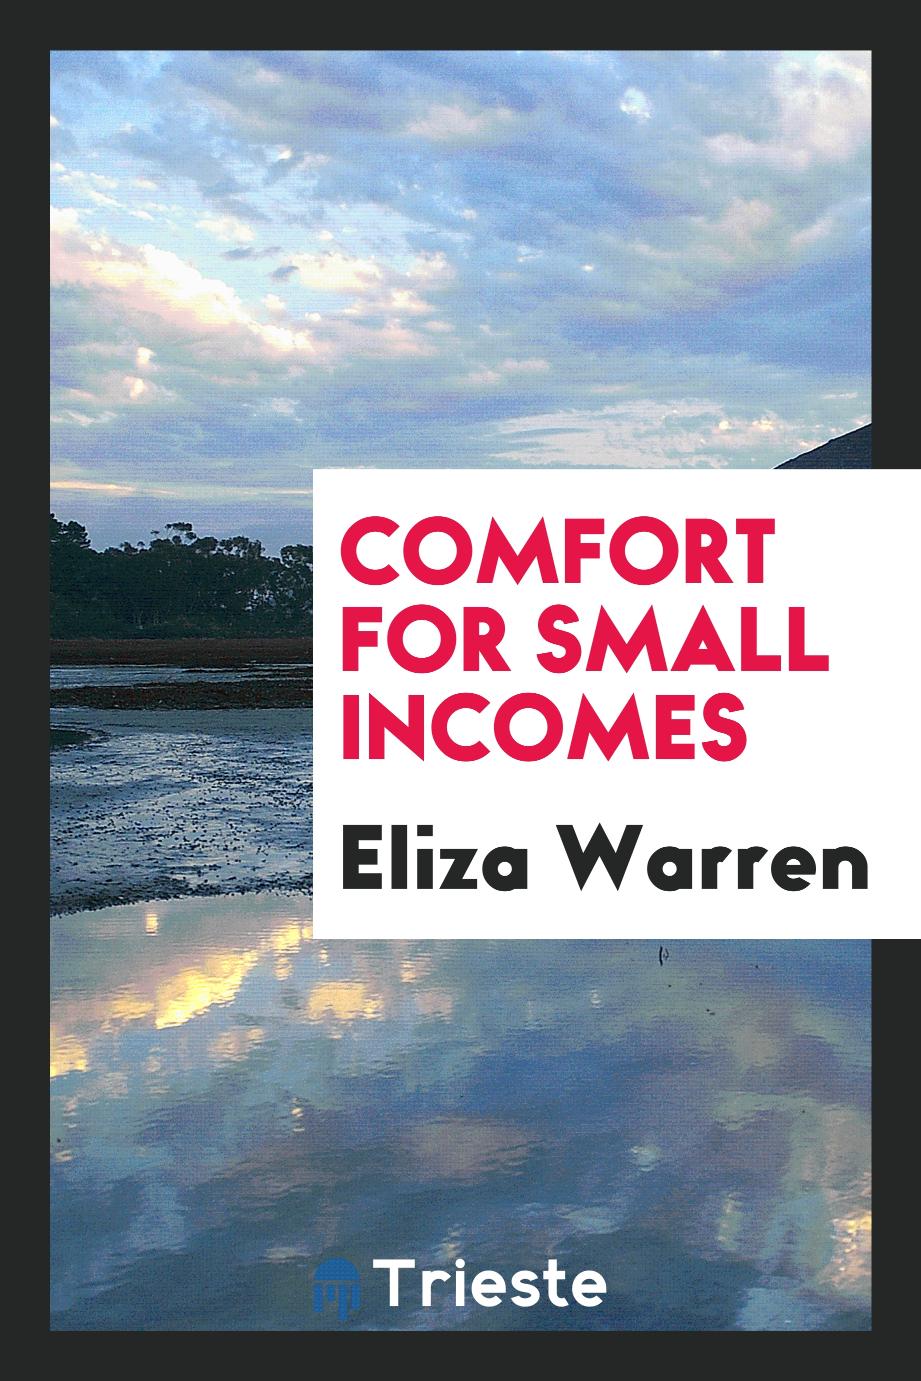 Comfort for small incomes